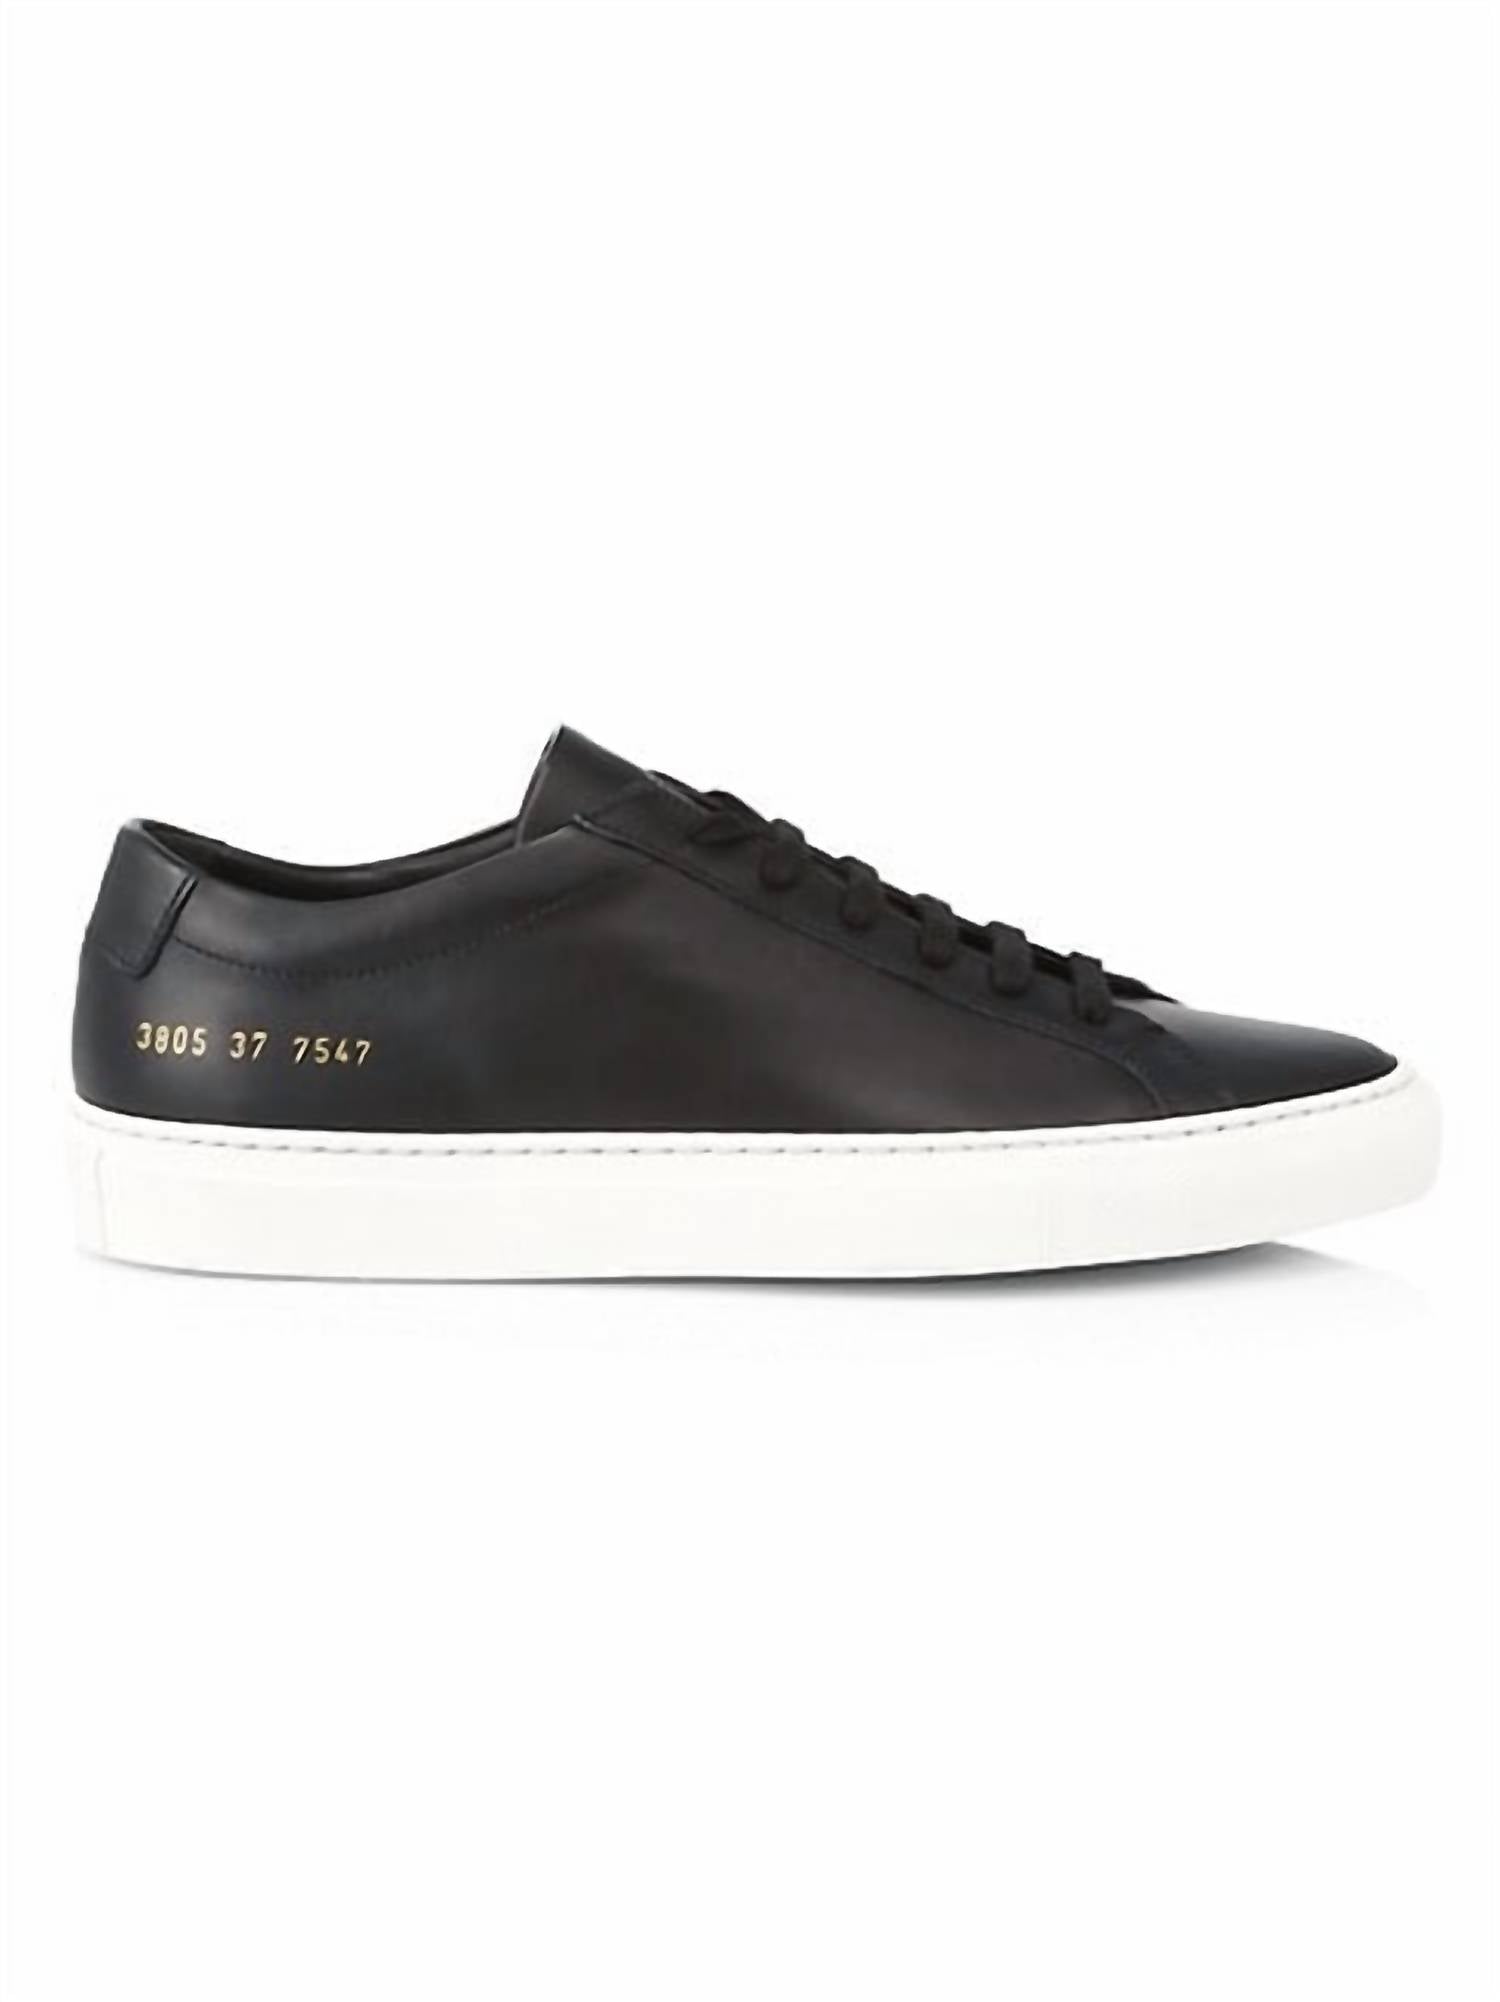 COMMON PROJECTS Women'S Original Achilles Leather Sneakers in Black